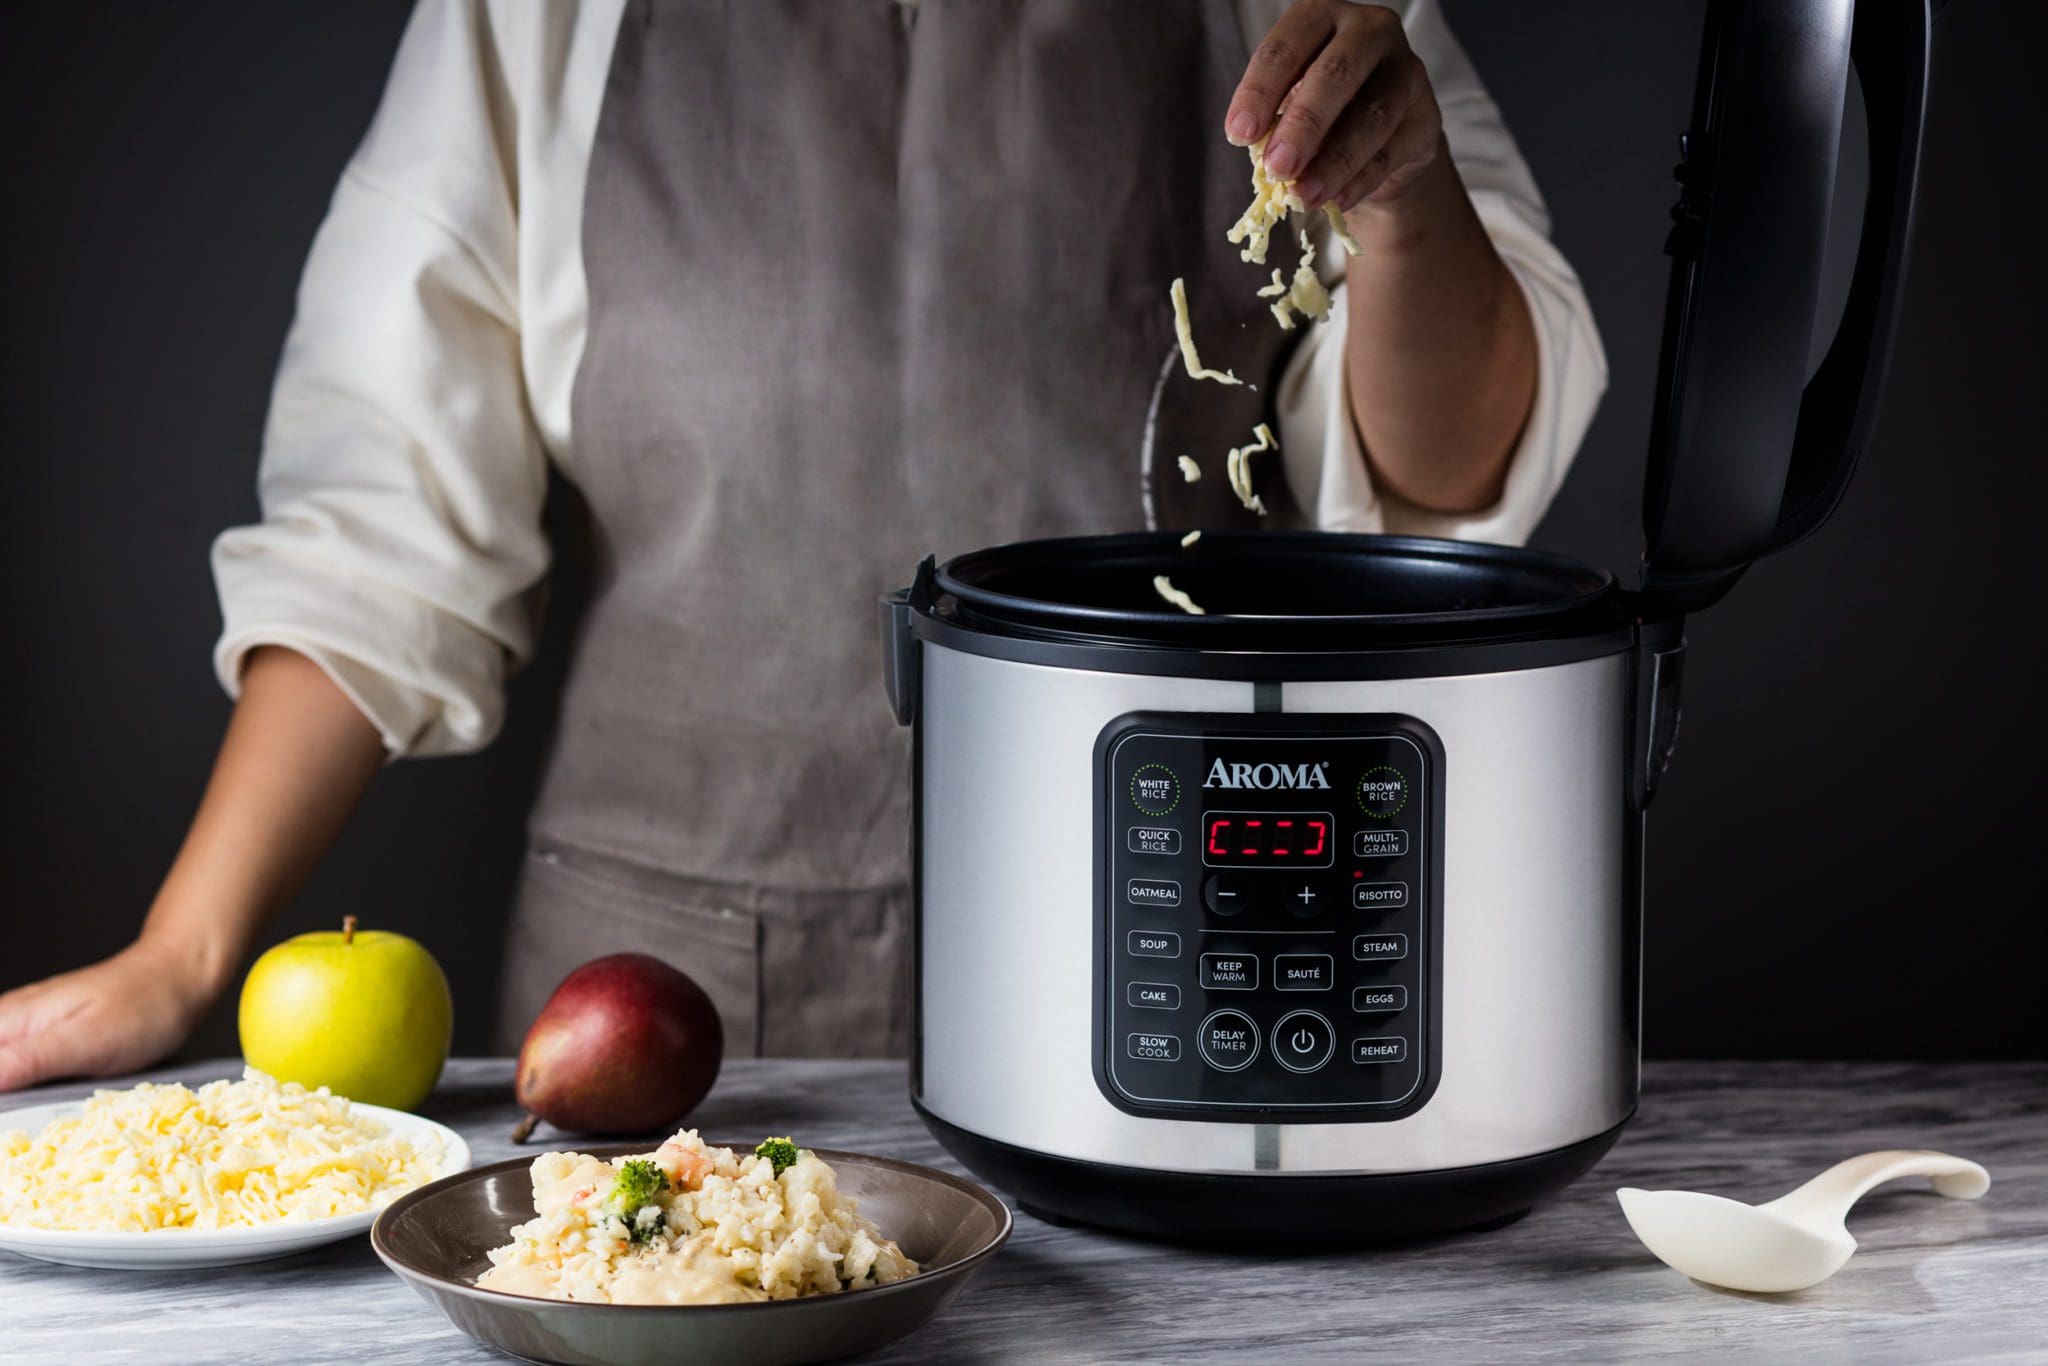 Master Home Cooking with Aroma's Sauté-Then-Simmer STS Function